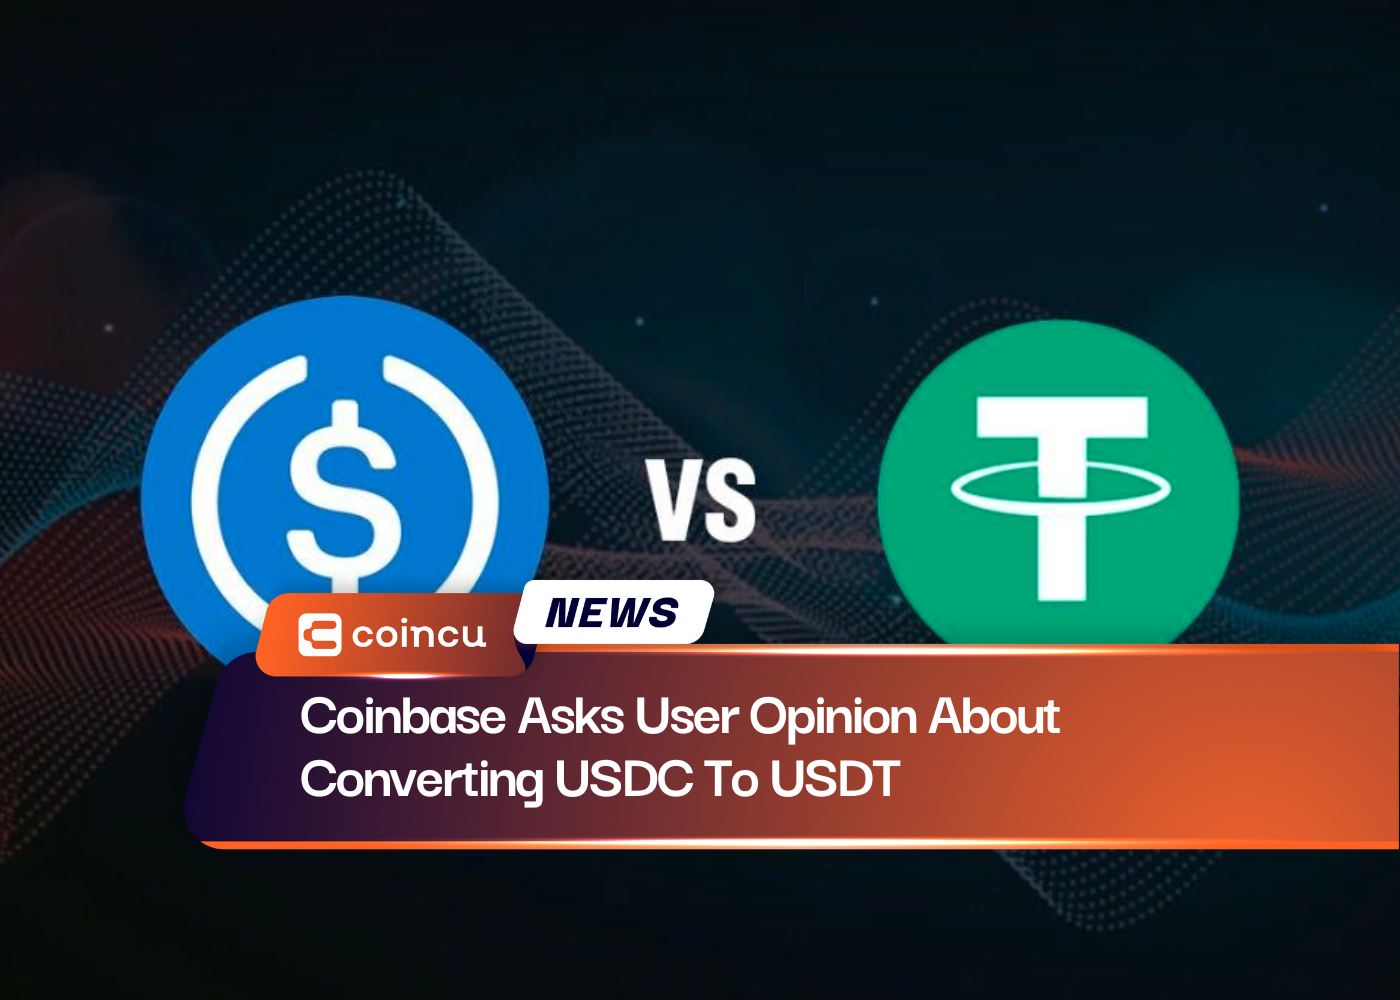 Coinbase Asks User Opinion About Converting USDC To USDT